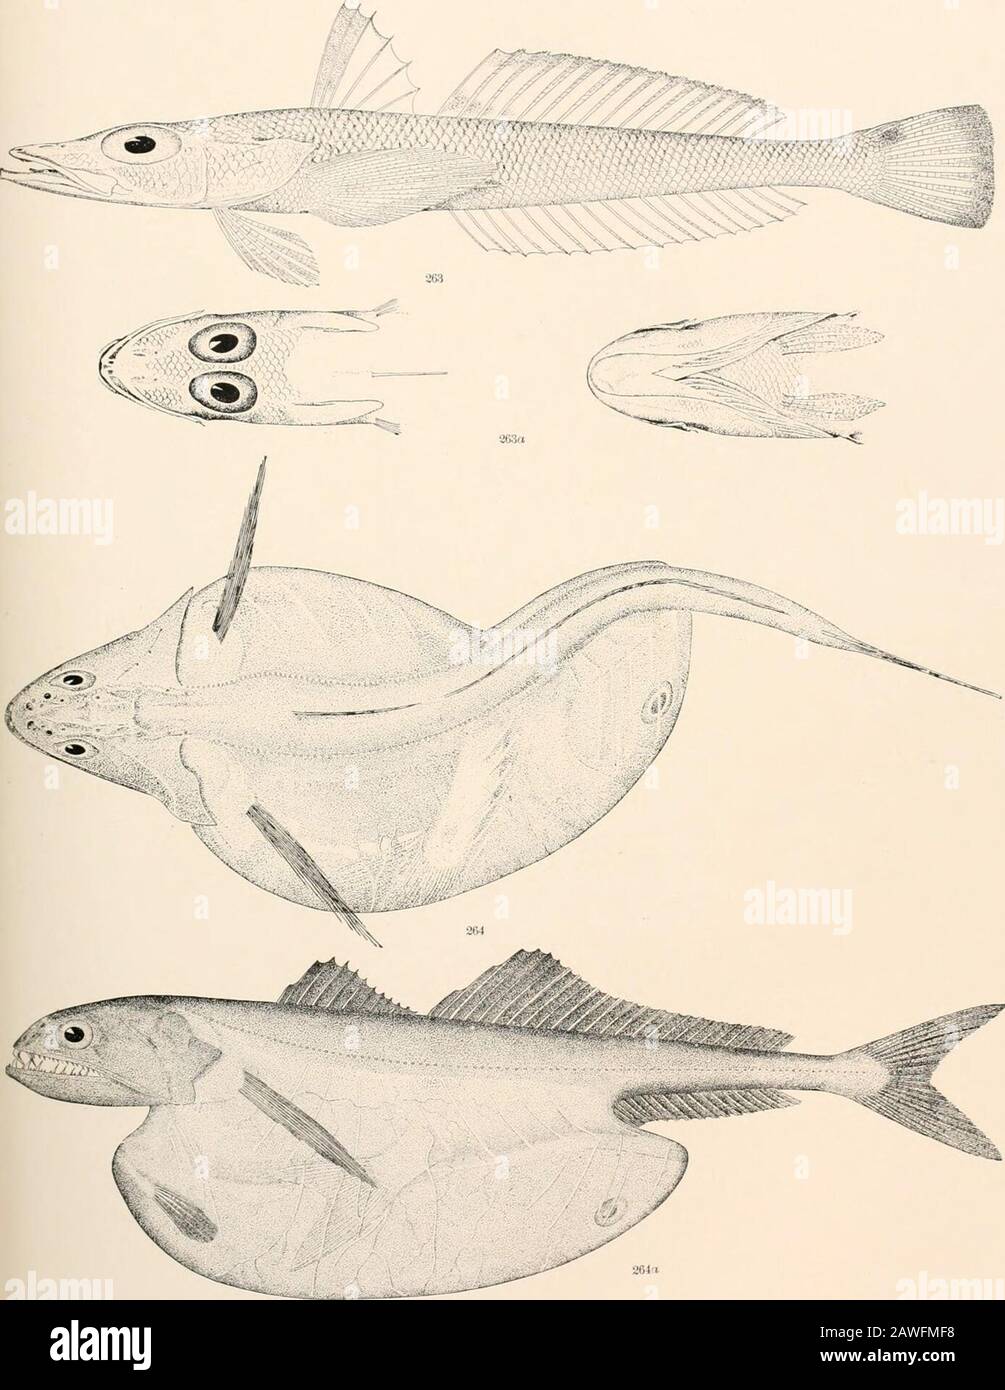 Oceanic ichthyology, a treatise on the deep-sea and pelagic fishes of the world, based chiefly upon the collections made by the steamers Blake, Albatross, and Fish Hawk in the northwestern Atlantic, with an atlas containing 417 figures . 261a, 6. CkHTUNCULUS MICROFS. (p. 269.) 262a. b. COTTUNCCLUS THOMSONII. (p. 270.) GOODE AND BEAN — OCEAN 10 ICHTHYOLOGY. PLATE LXXIV.. 263, 263a, b. Hypsicometes gobioides. (p. 290.) 264,264a. Chiasmodom nicer, (p. 292.) GOODE AND BEAN.—OCEANIC ICHTHYOLOGY. PLATE LXXV. Stock Photo